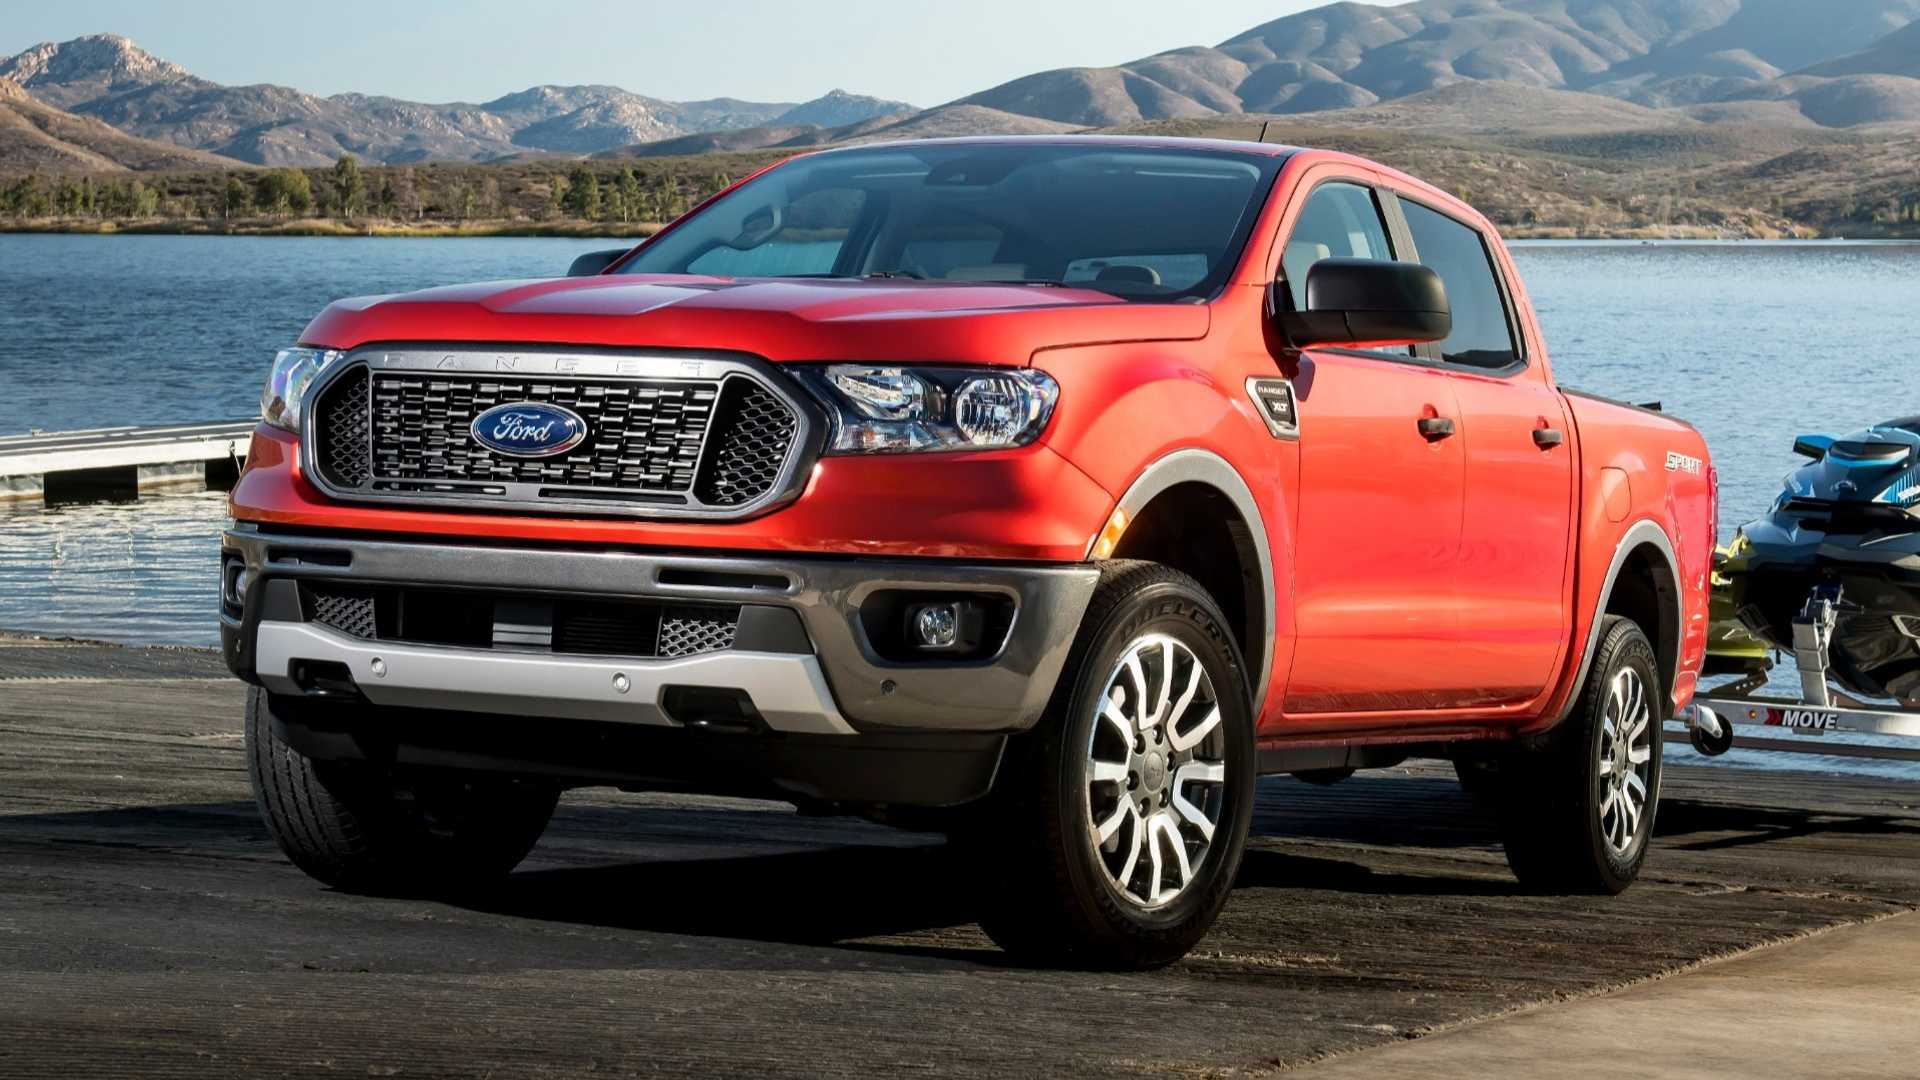 Ford Ranger Gets Performance Pack Pushing Output To 315 HP